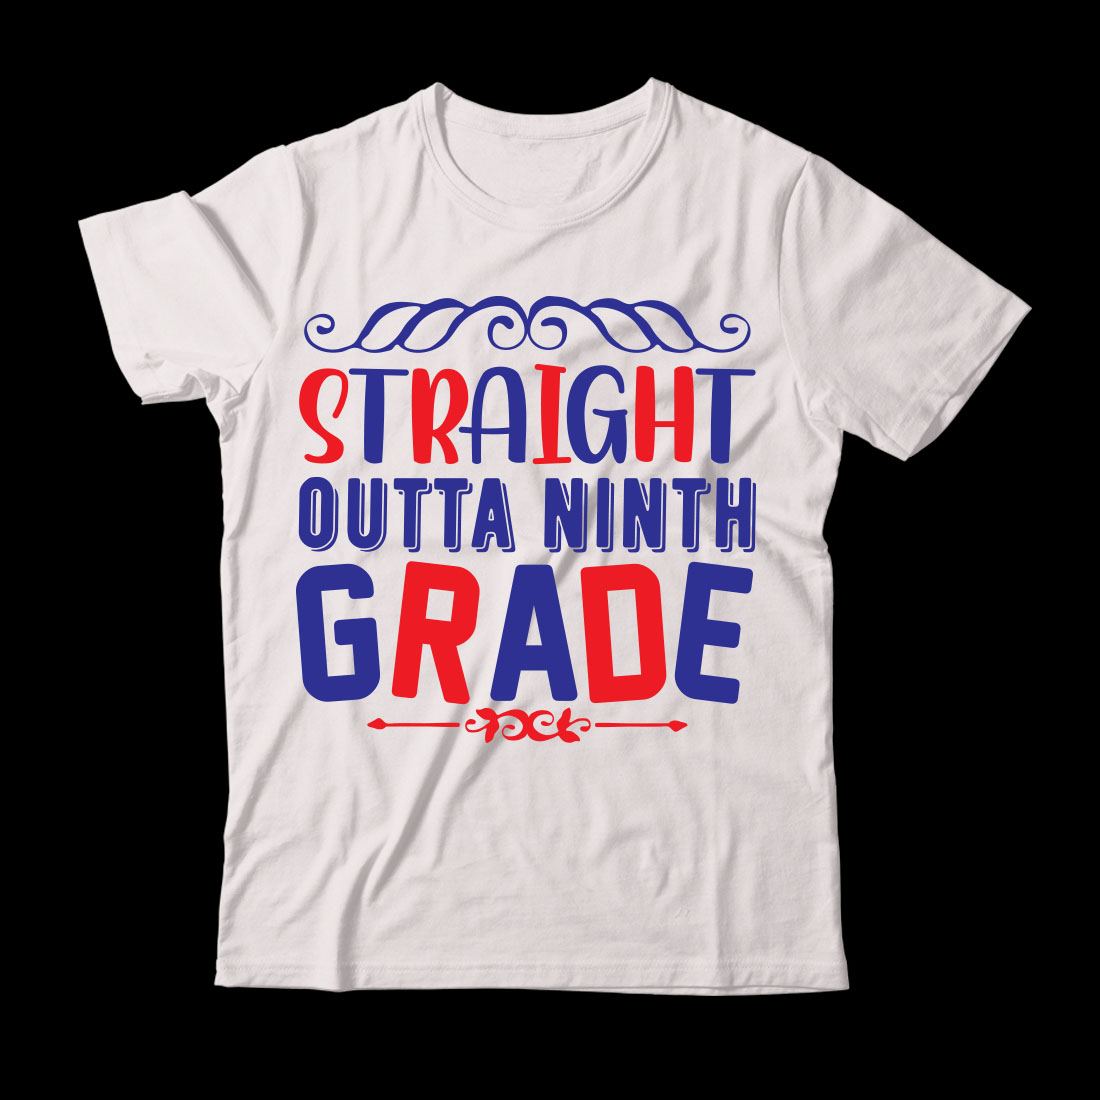 White t - shirt with the words straight out of a ninth grade on it.